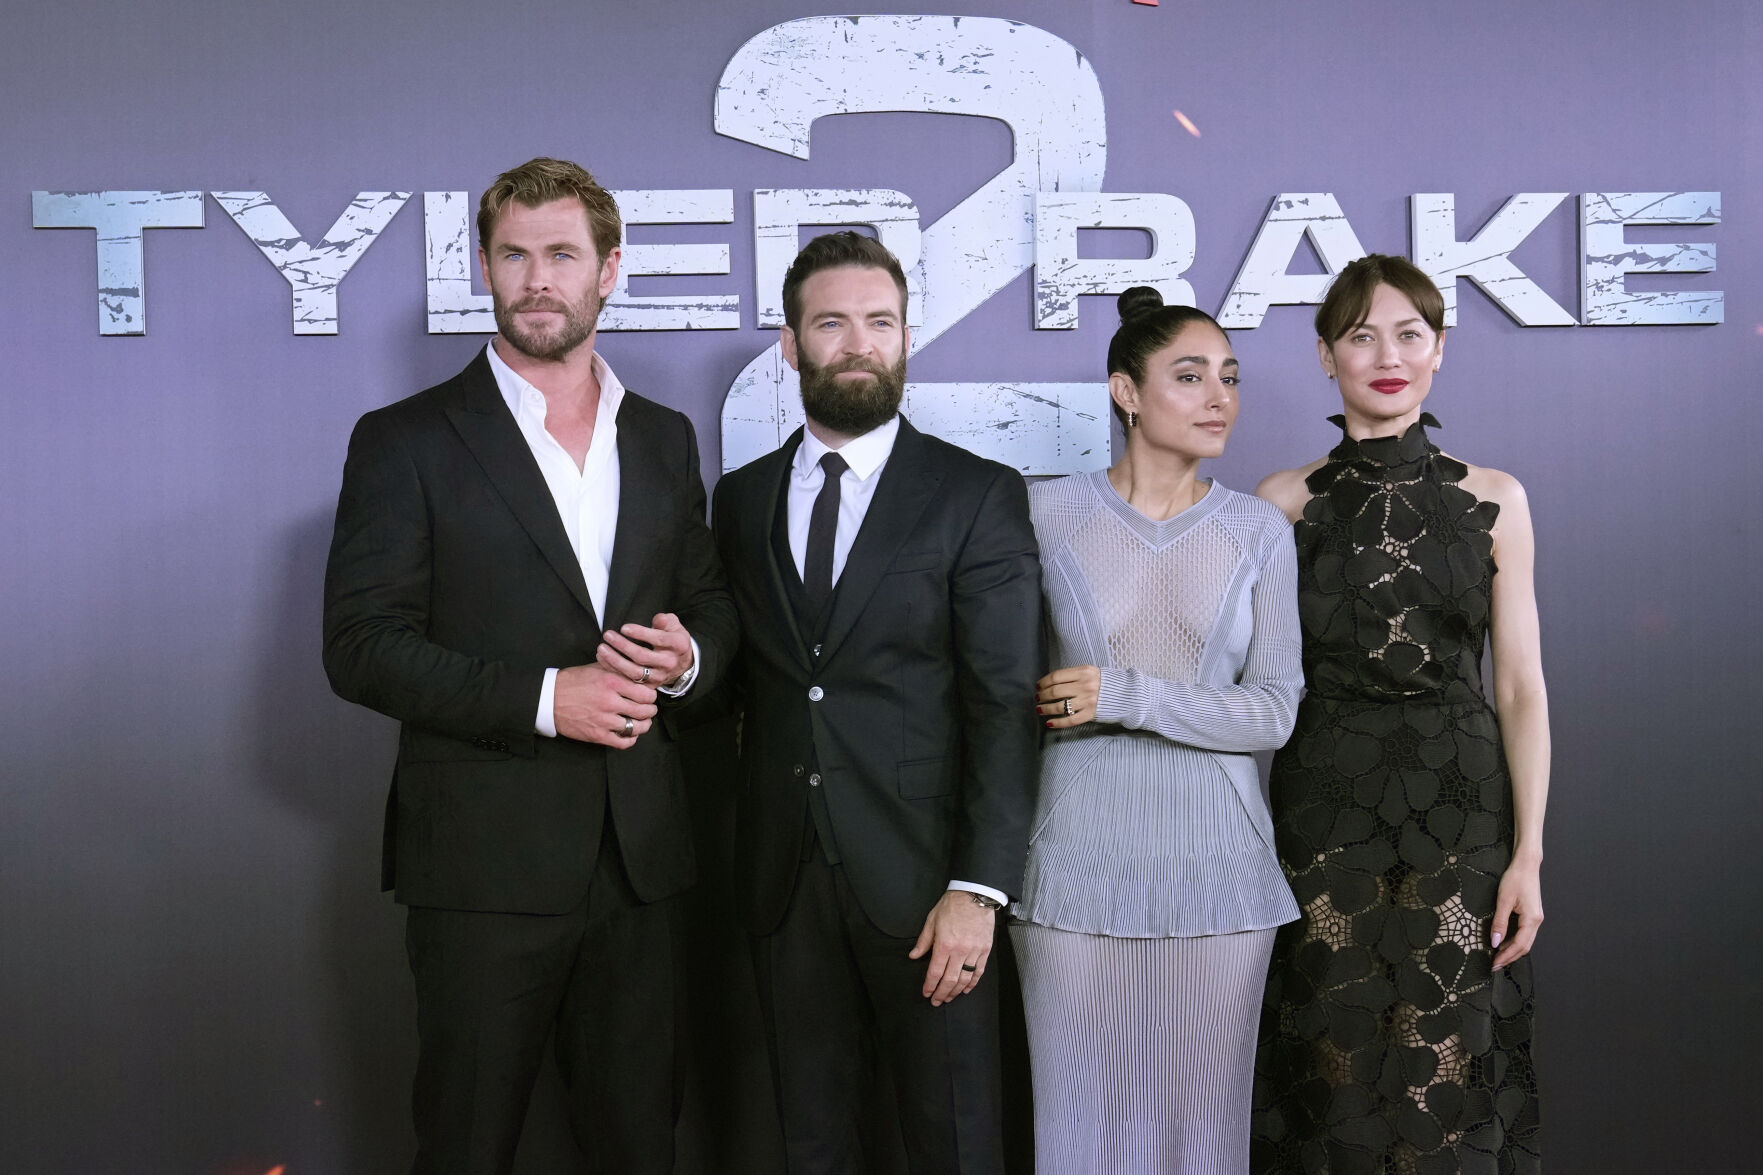 Actor Chris Hemsworth, left, poses with Director Sam Hargrave, 2nd left, Golshifteh Farahani, 3rd left and actress Olga Kurylenko, right, during the Extraction 2 movie premiere in Madrid, Spain, Wednesday, June 7, 2023.